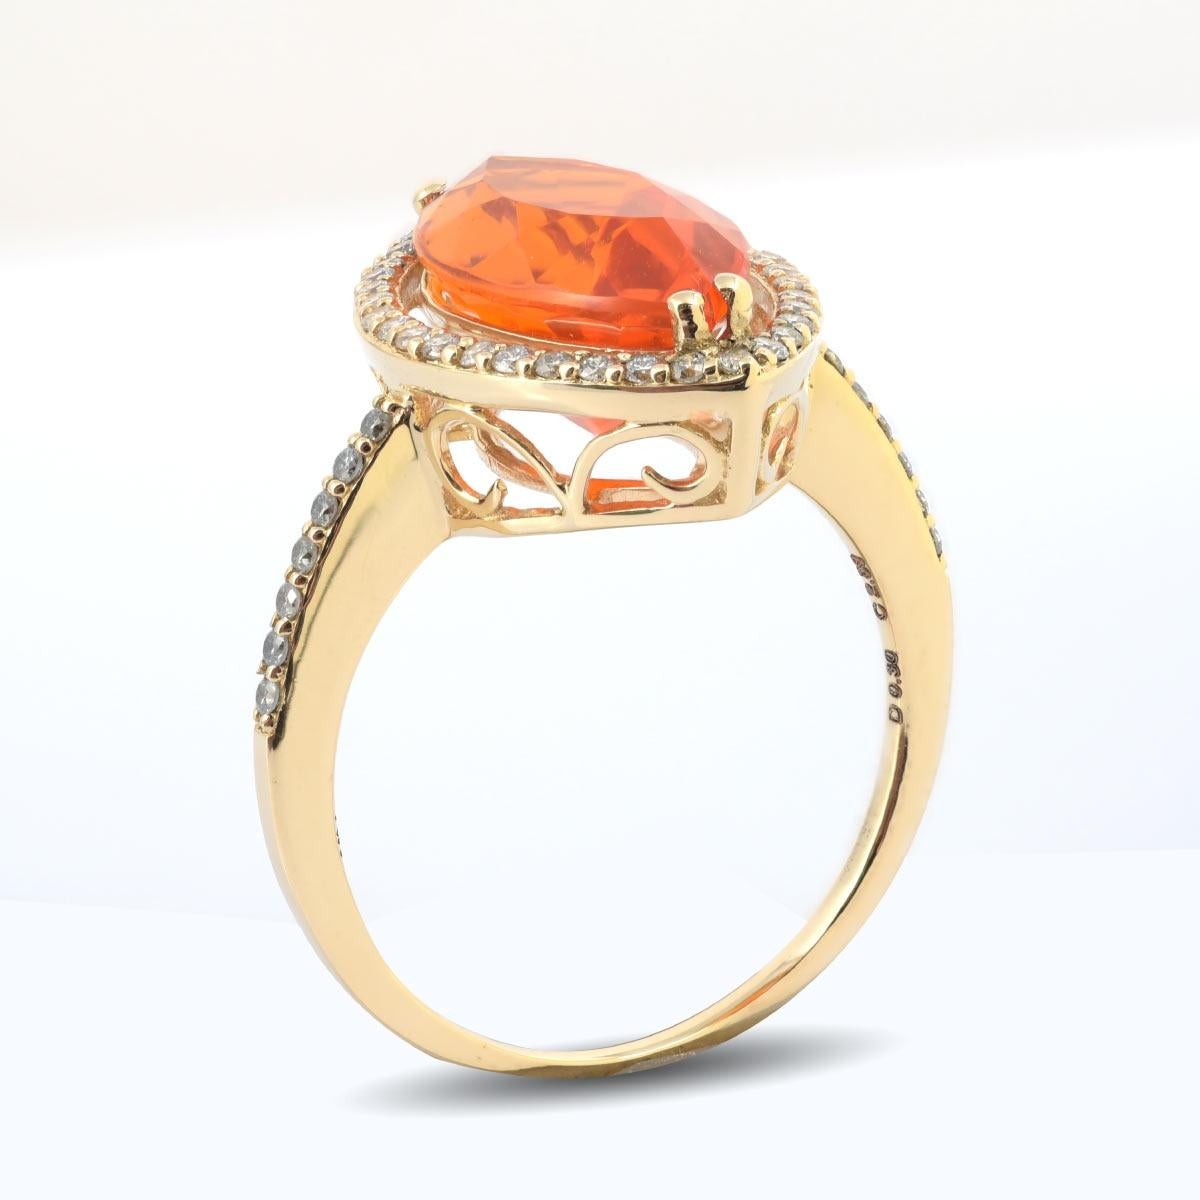 Bursting with color this Mexican Fire Opal is filled with a rich color to bring any outfit to life. Masterfully crafted this marquise gem weighs 2.89 carats and has been set in 14K yellow gold that brings the entire piece together. Just like the